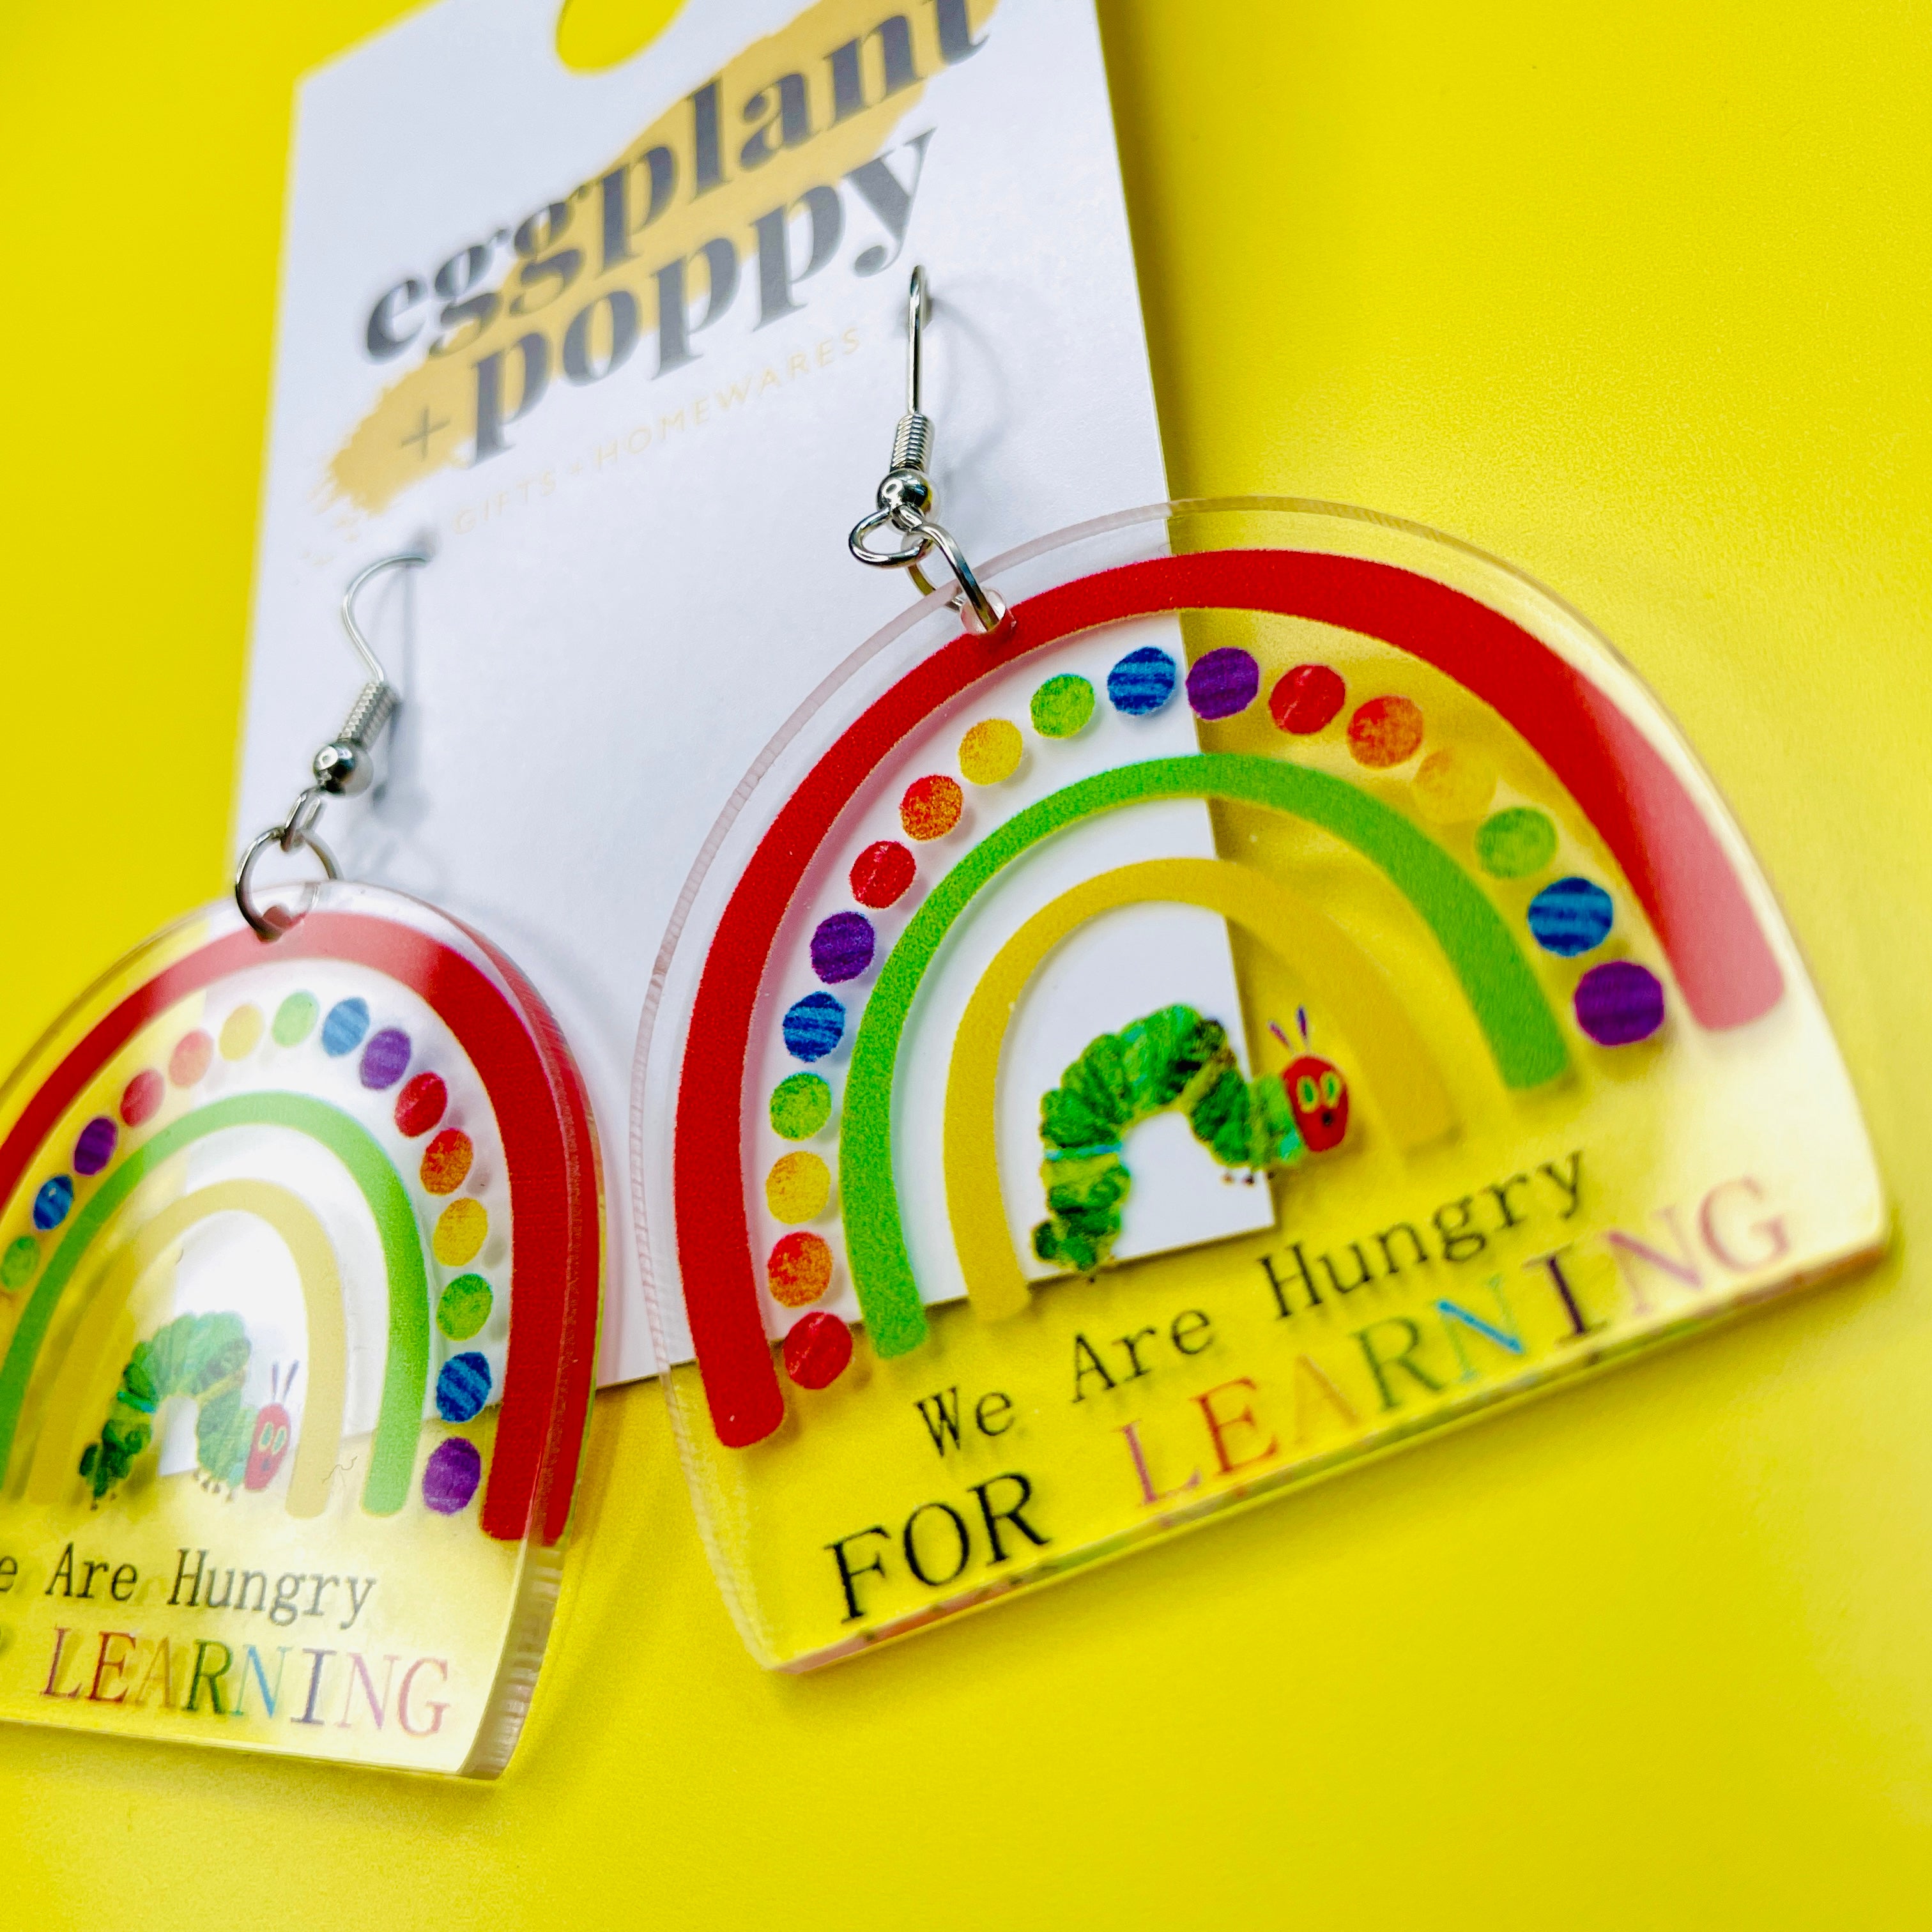 Hungry For Learning Earrings